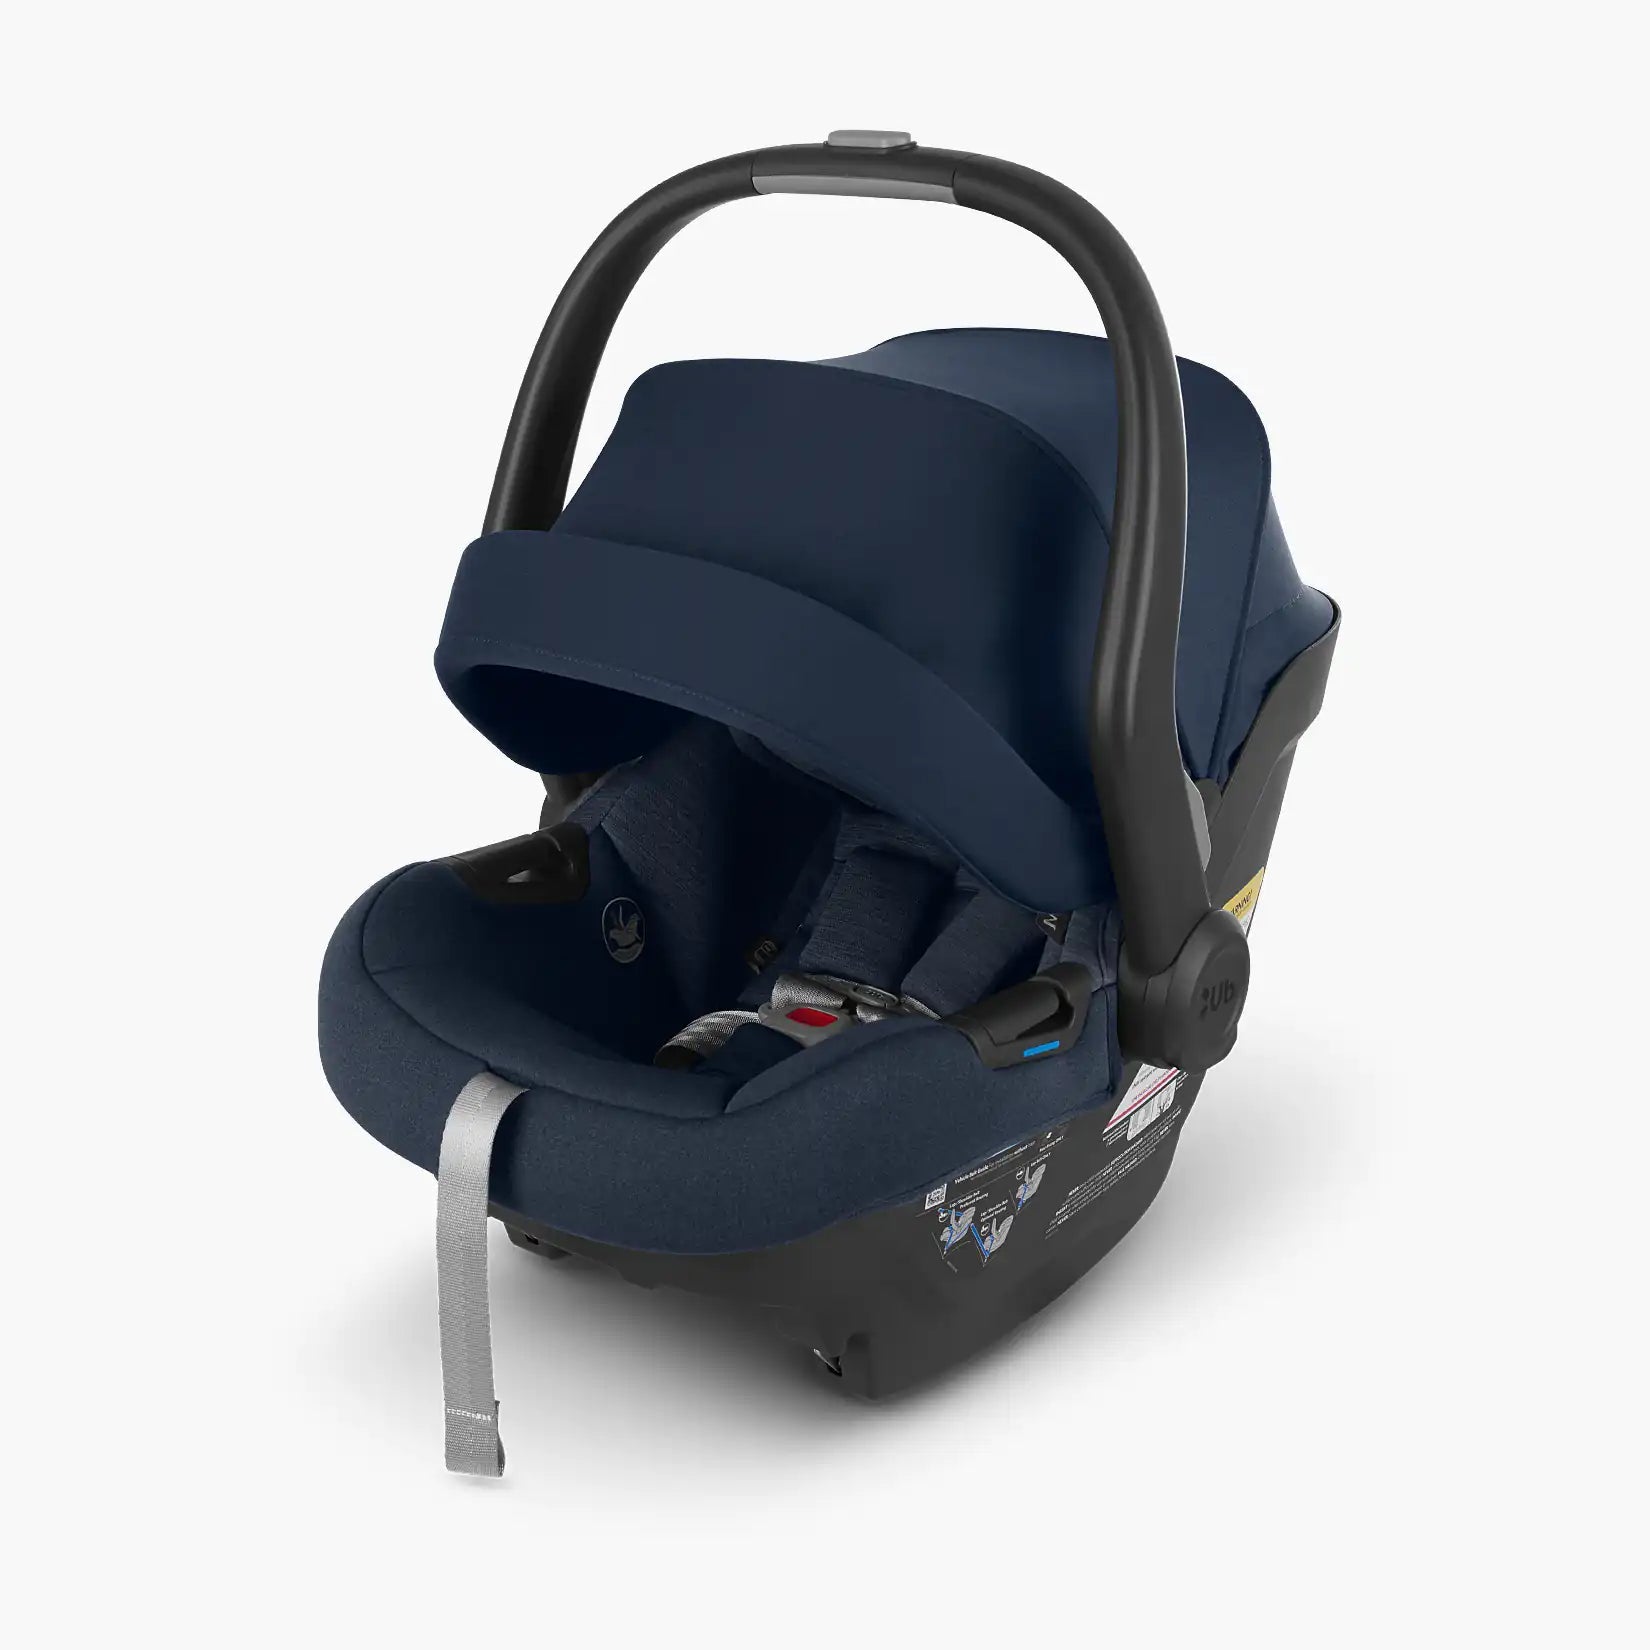 UPPAbaby MESA MAX Infant Car Seat in Noa